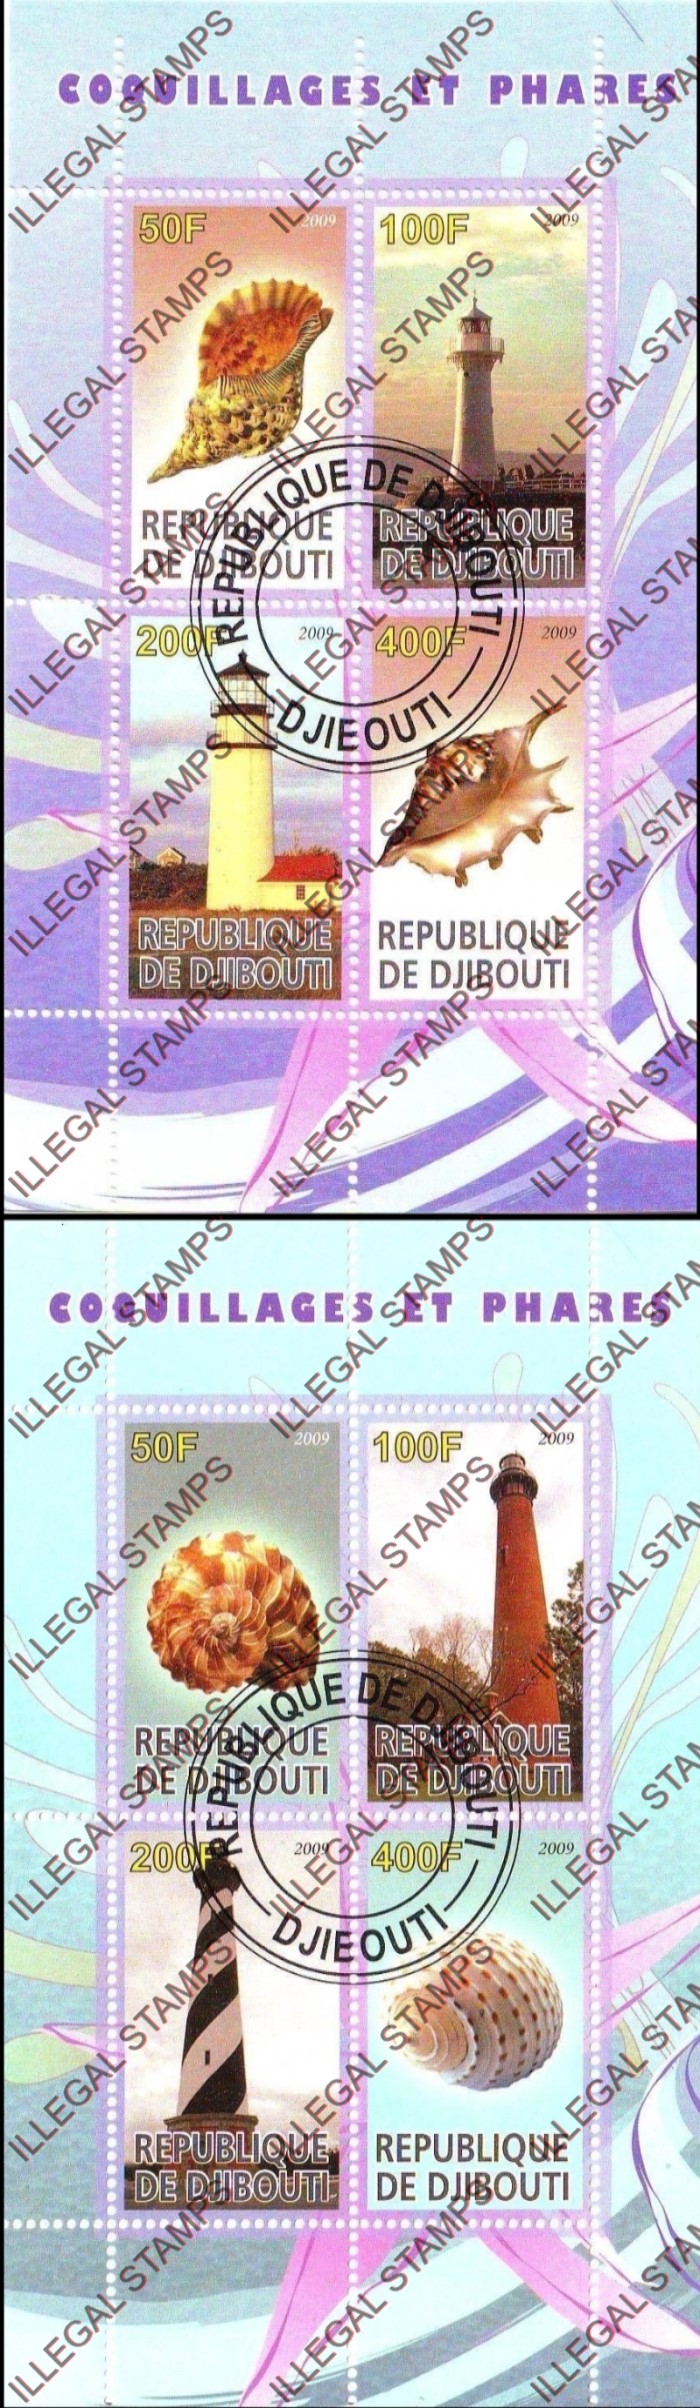 Djibouti 2009 Lighthouses and Shells Illegal Stamp Souvenir Sheets of 4